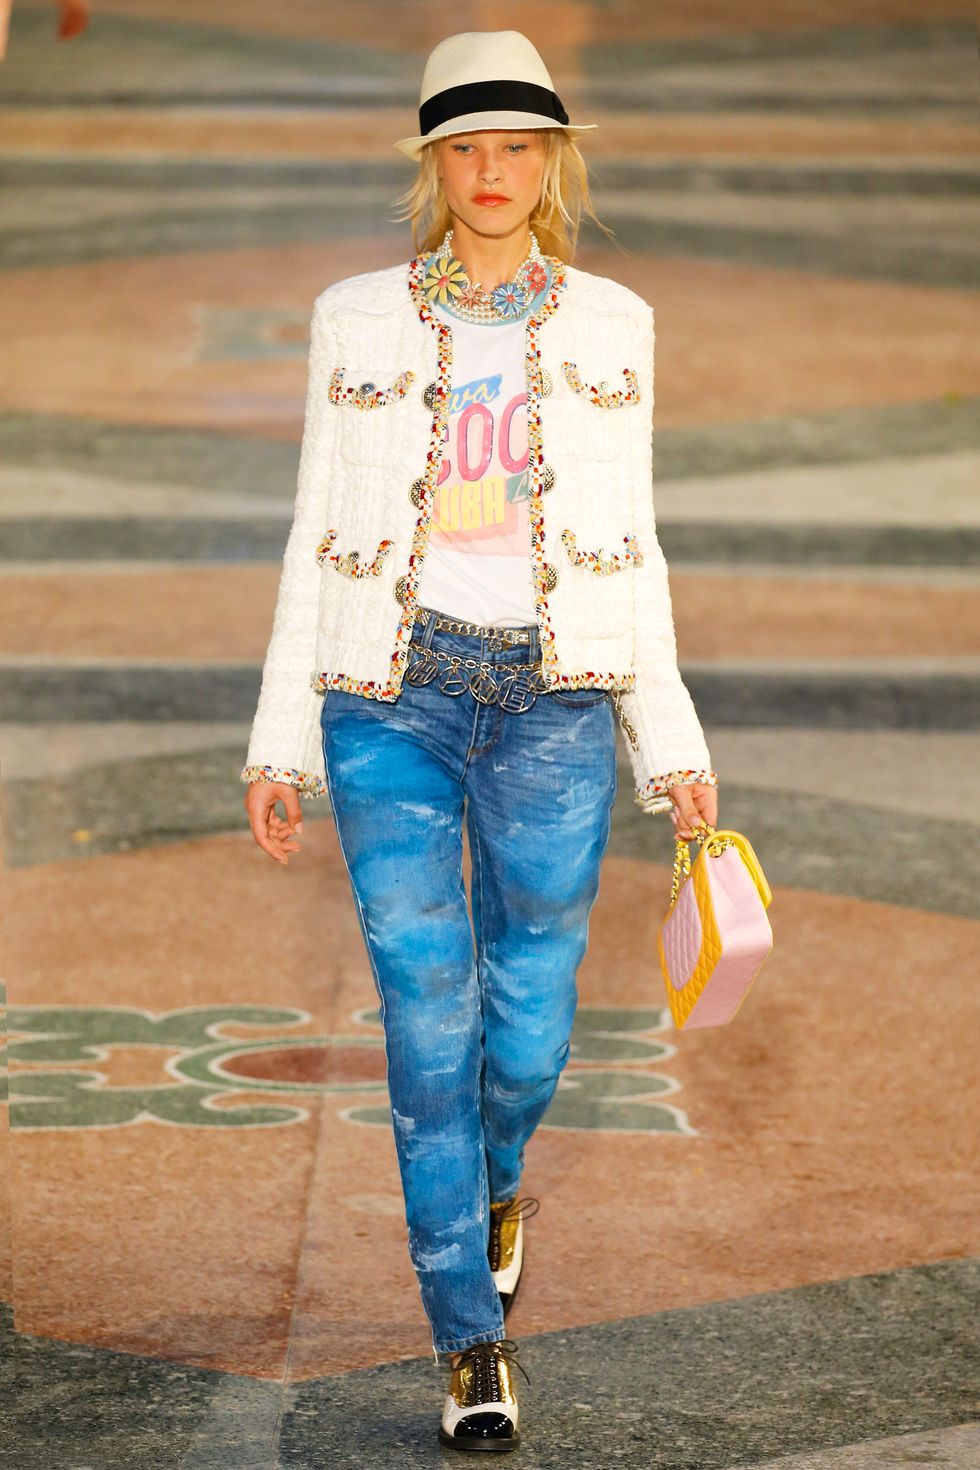 Chanel Cruise 2017 Collection In Cuba [PHOTOS] – Footwear News